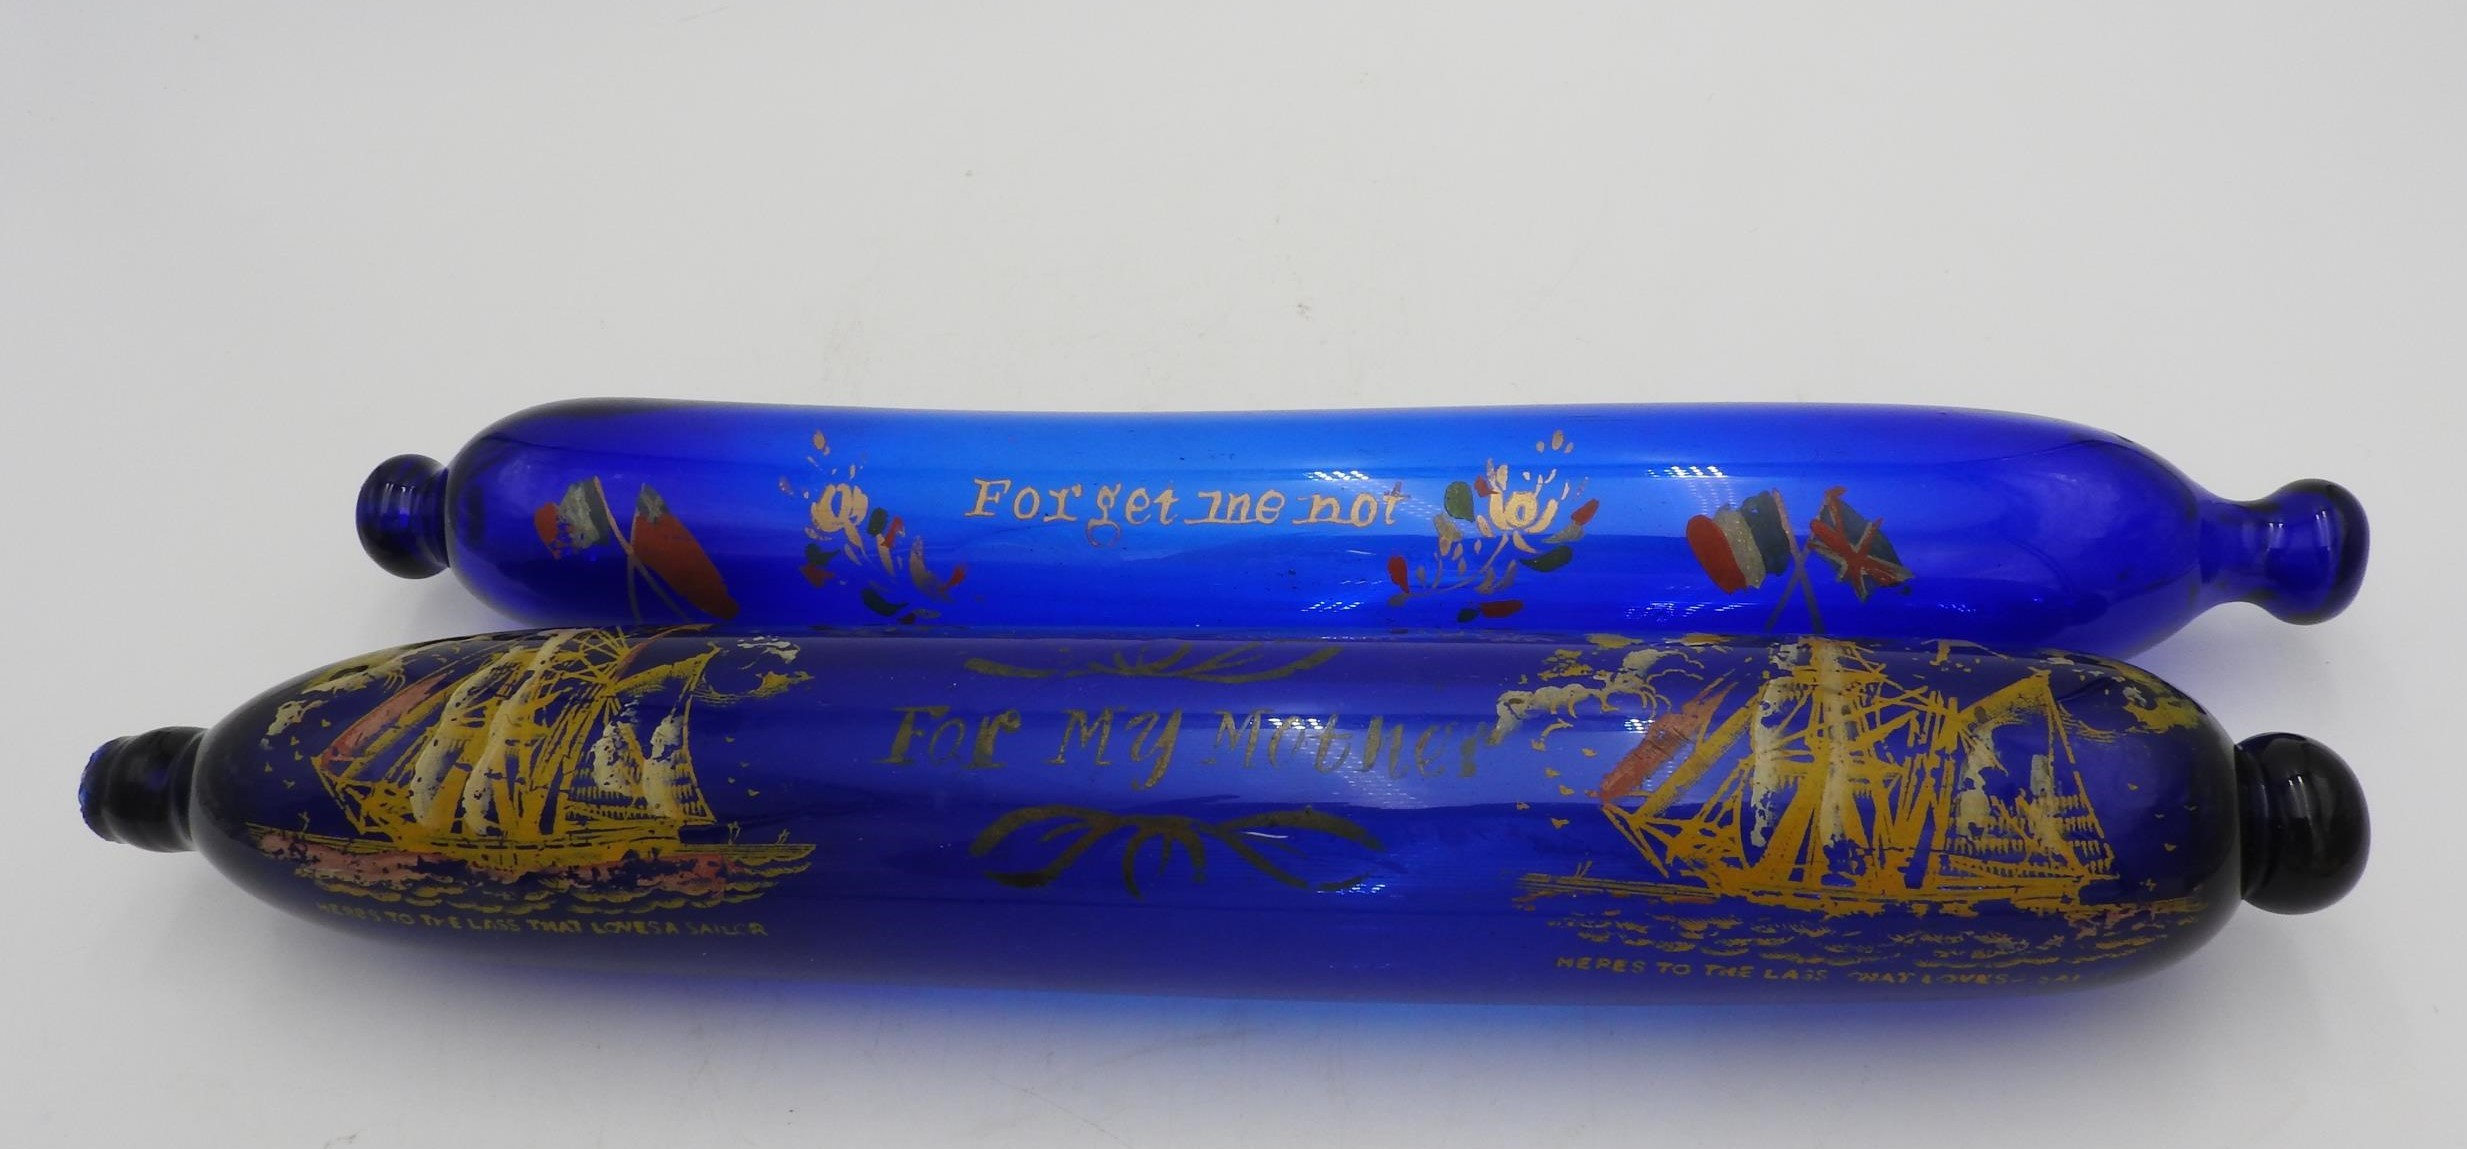 FIVE EARLY 19TH CENTURY COMMEMORATIVE BRISTOL COBALT BLUE GLASS NAVAL ROLLING PINS, 33 cm long - Image 2 of 2